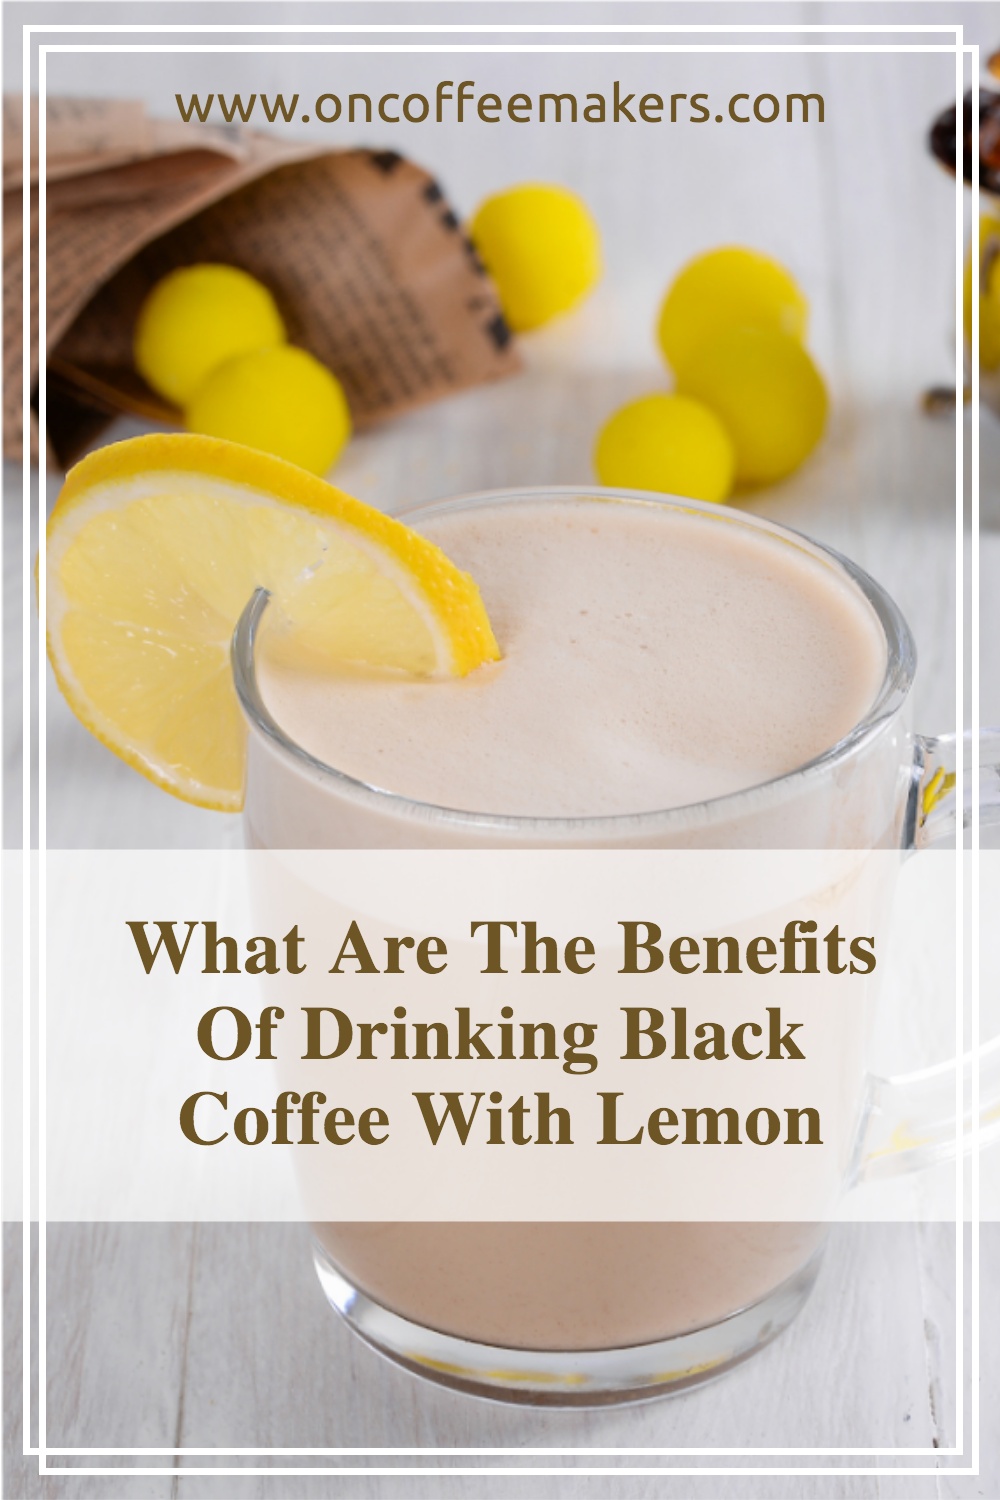 What-Are-The-Benefits-Of-Drinking-Black-Coffee-With-Lemon.jpg